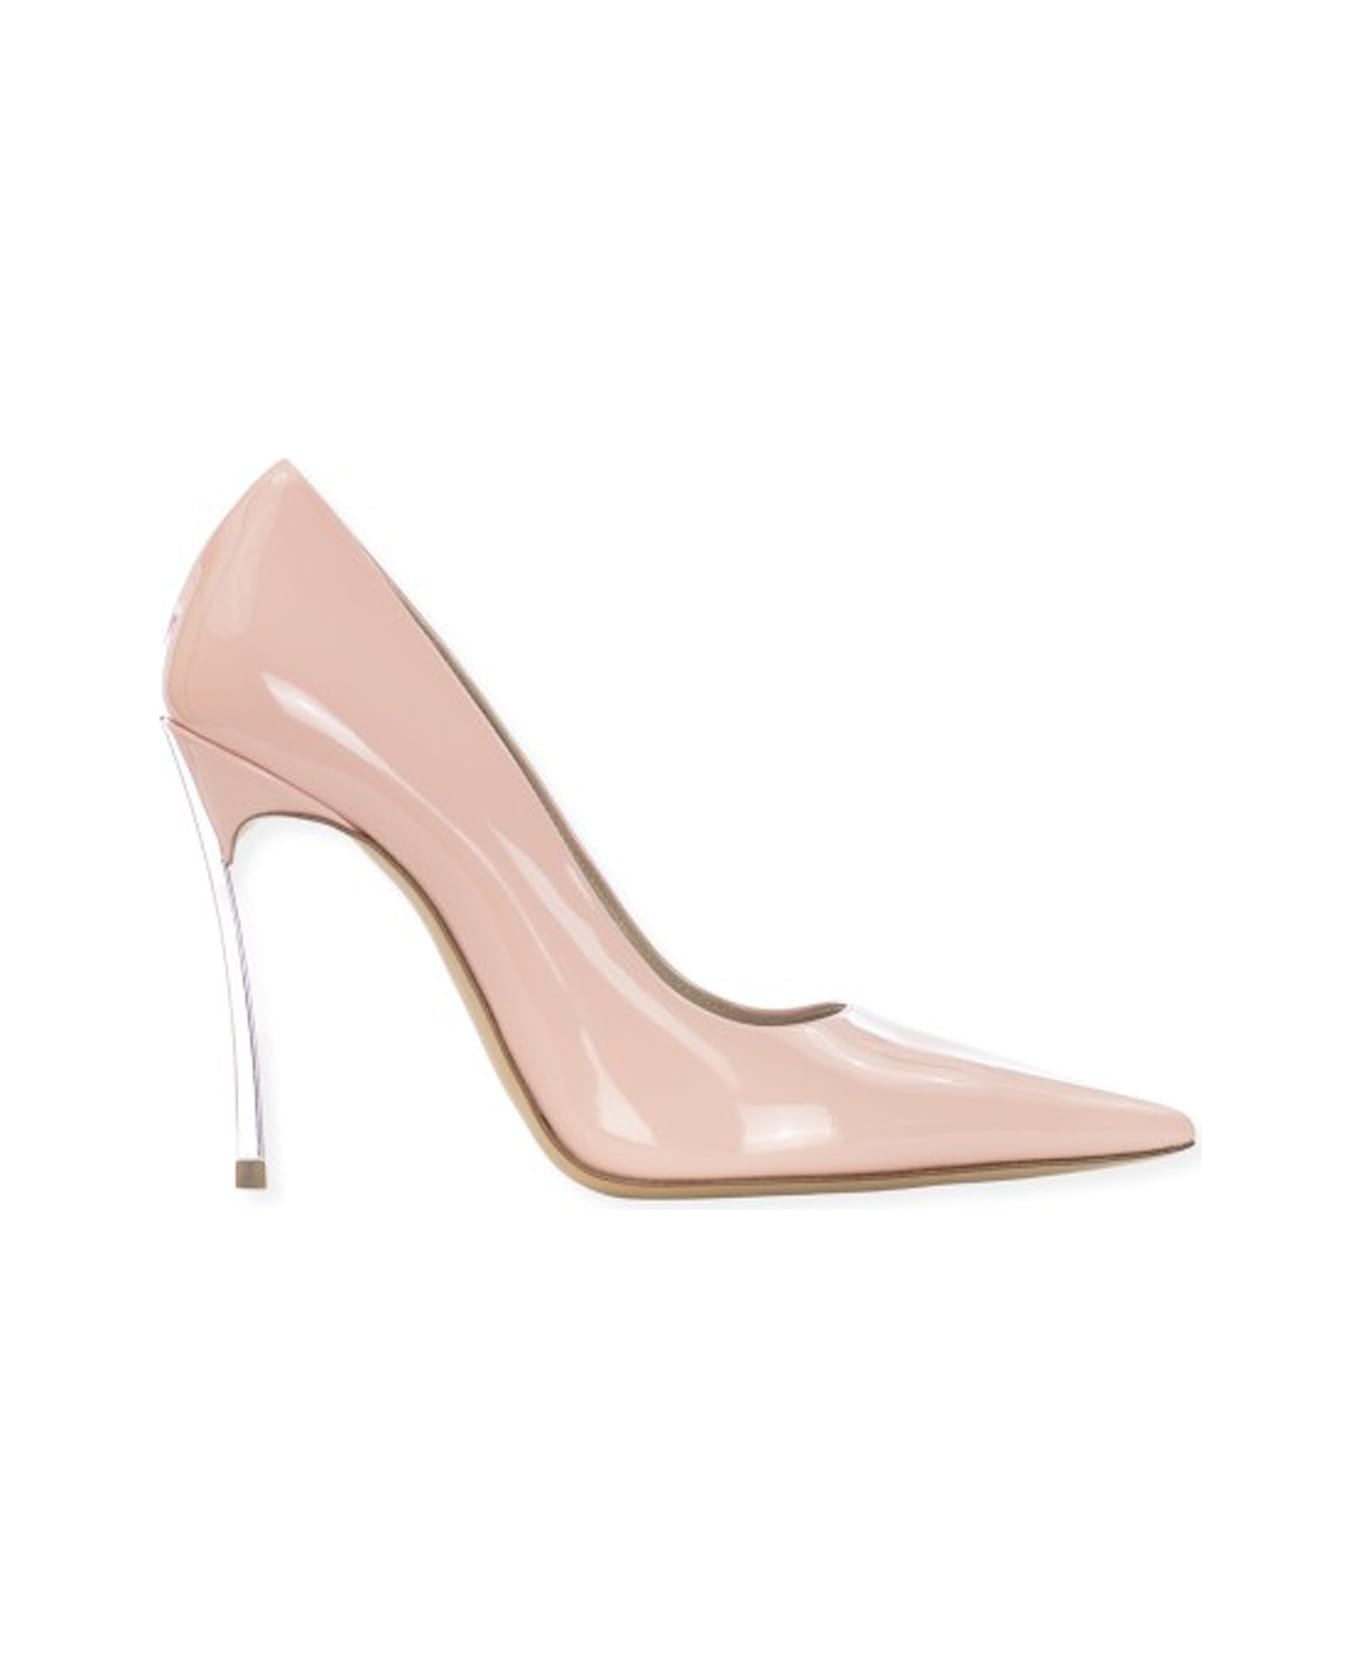 Casadei Shoes With Heels - Pink ハイヒール